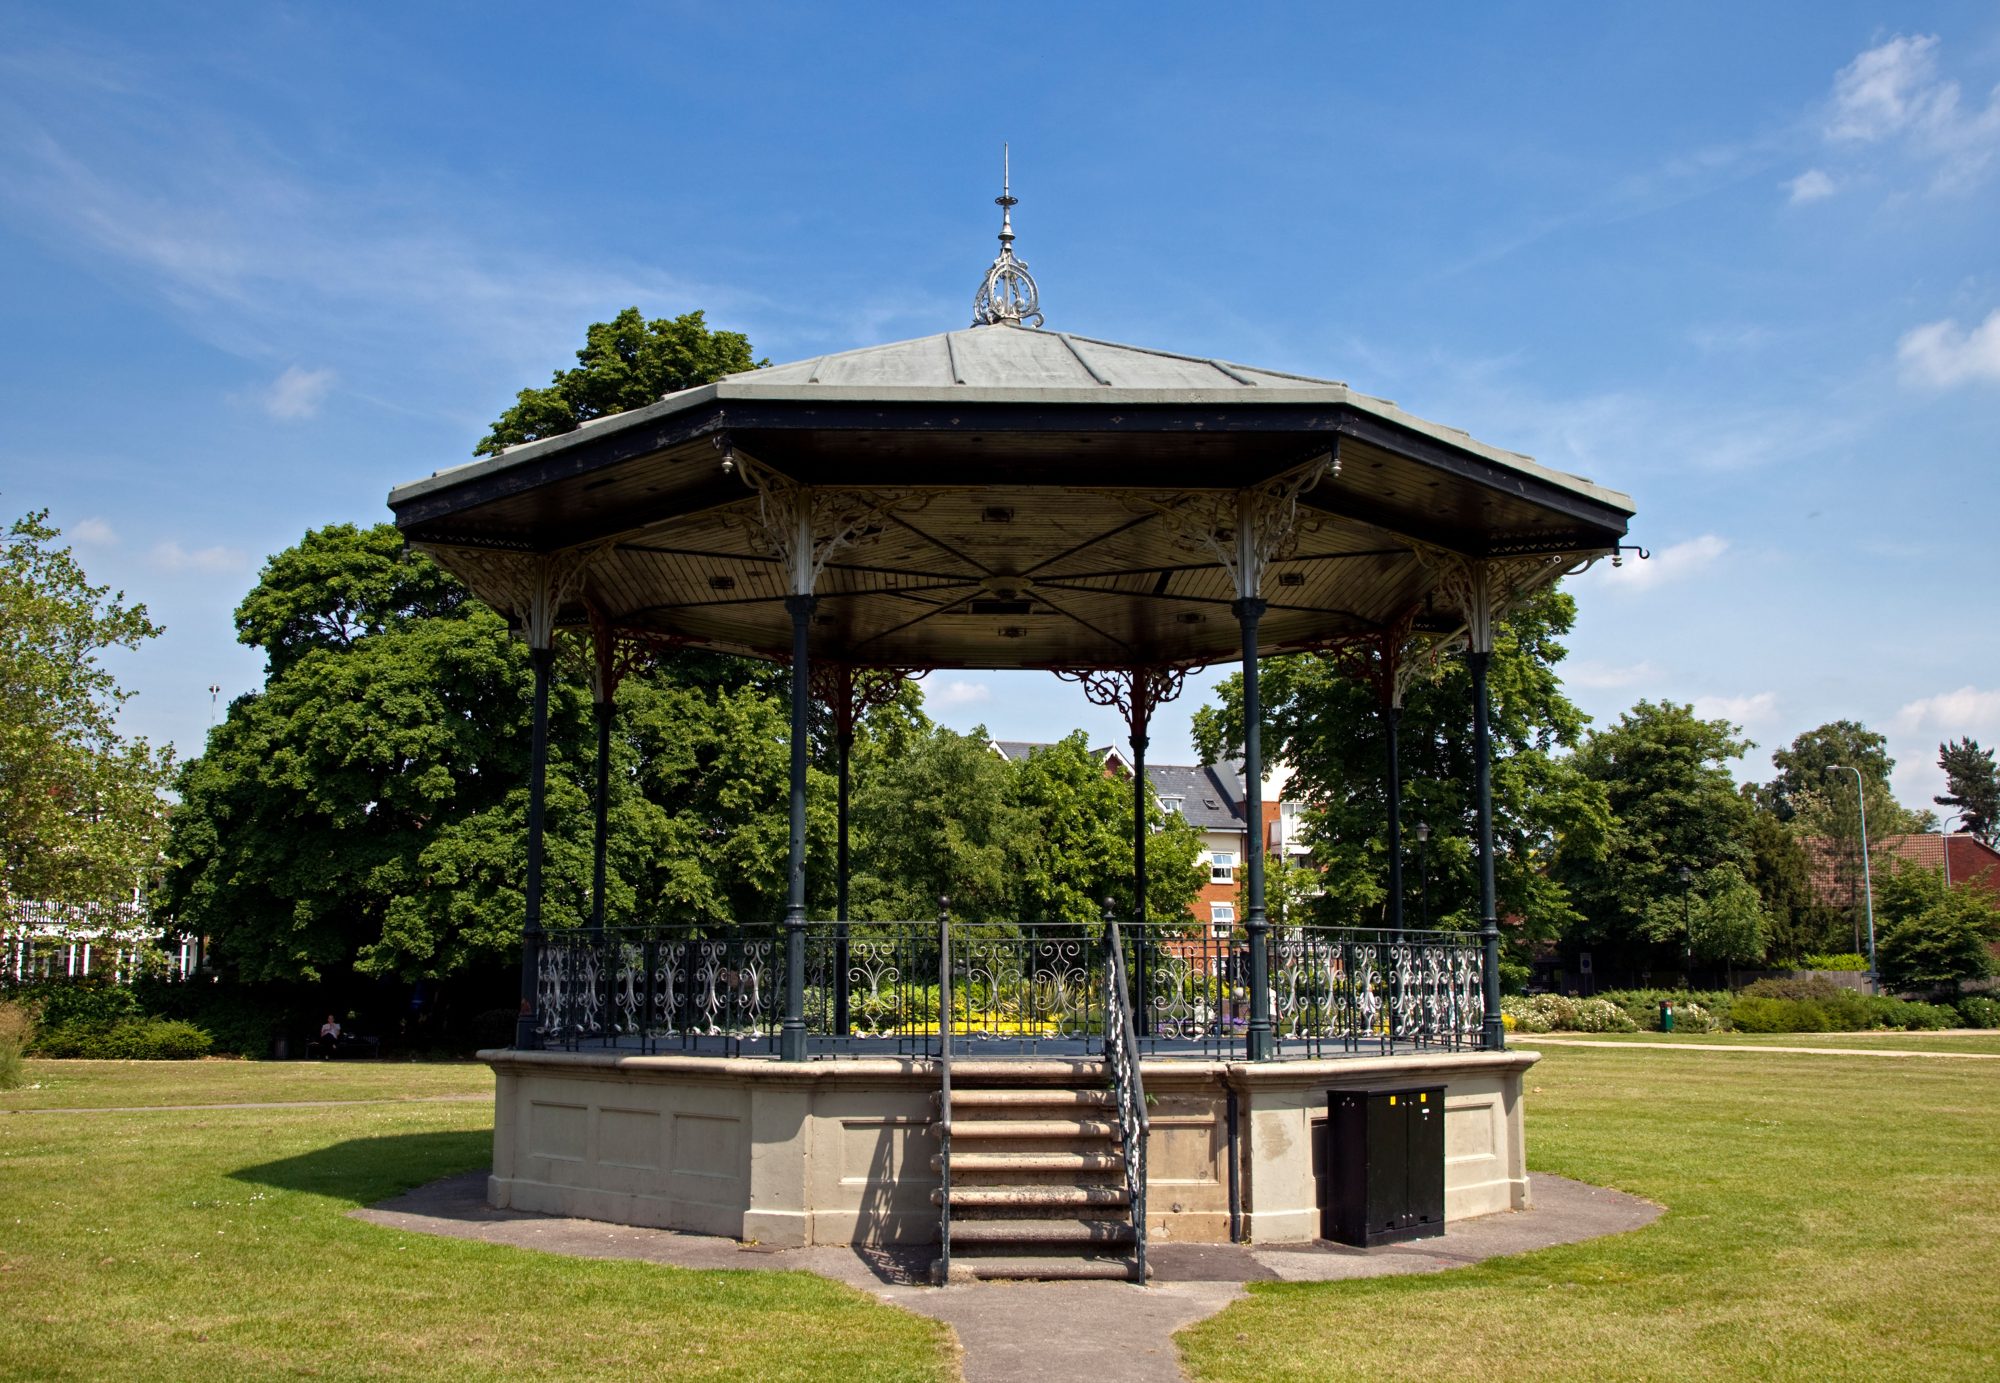 Image of a bandstand in a park